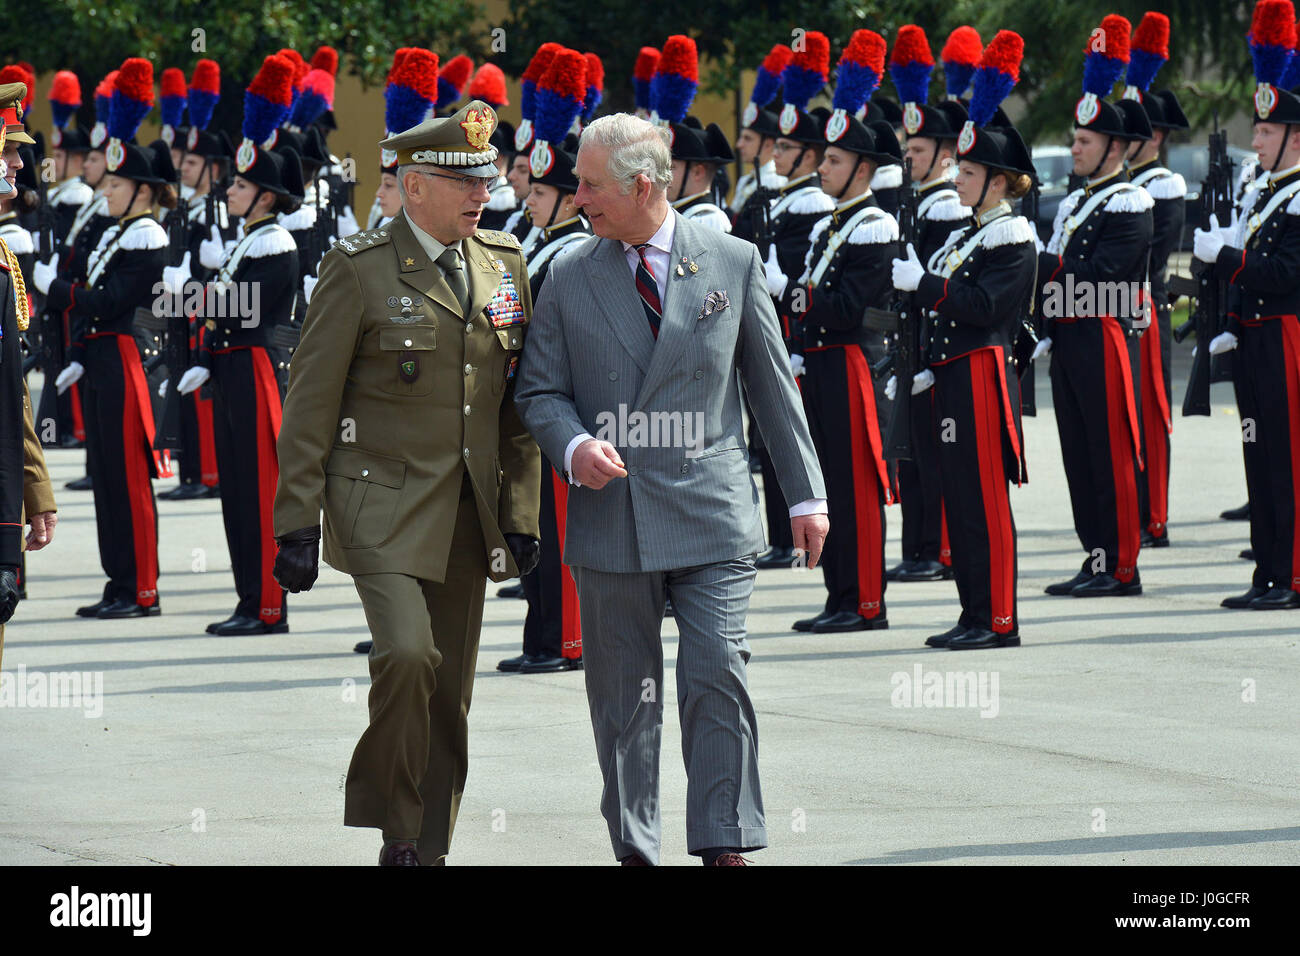 The Royal Highness, Prince Charles, Prince of Wales (right), and Gen. Claudio Graziano, Italian Army Chief of Staff (left), during visit at Center of Excellence for Stability Police Units (CoESPU) Vicenza, Italy, April 1, 2017. (U.S. Army Photo by Visual Information Specialist Antonio Bedin/released) Stock Photo